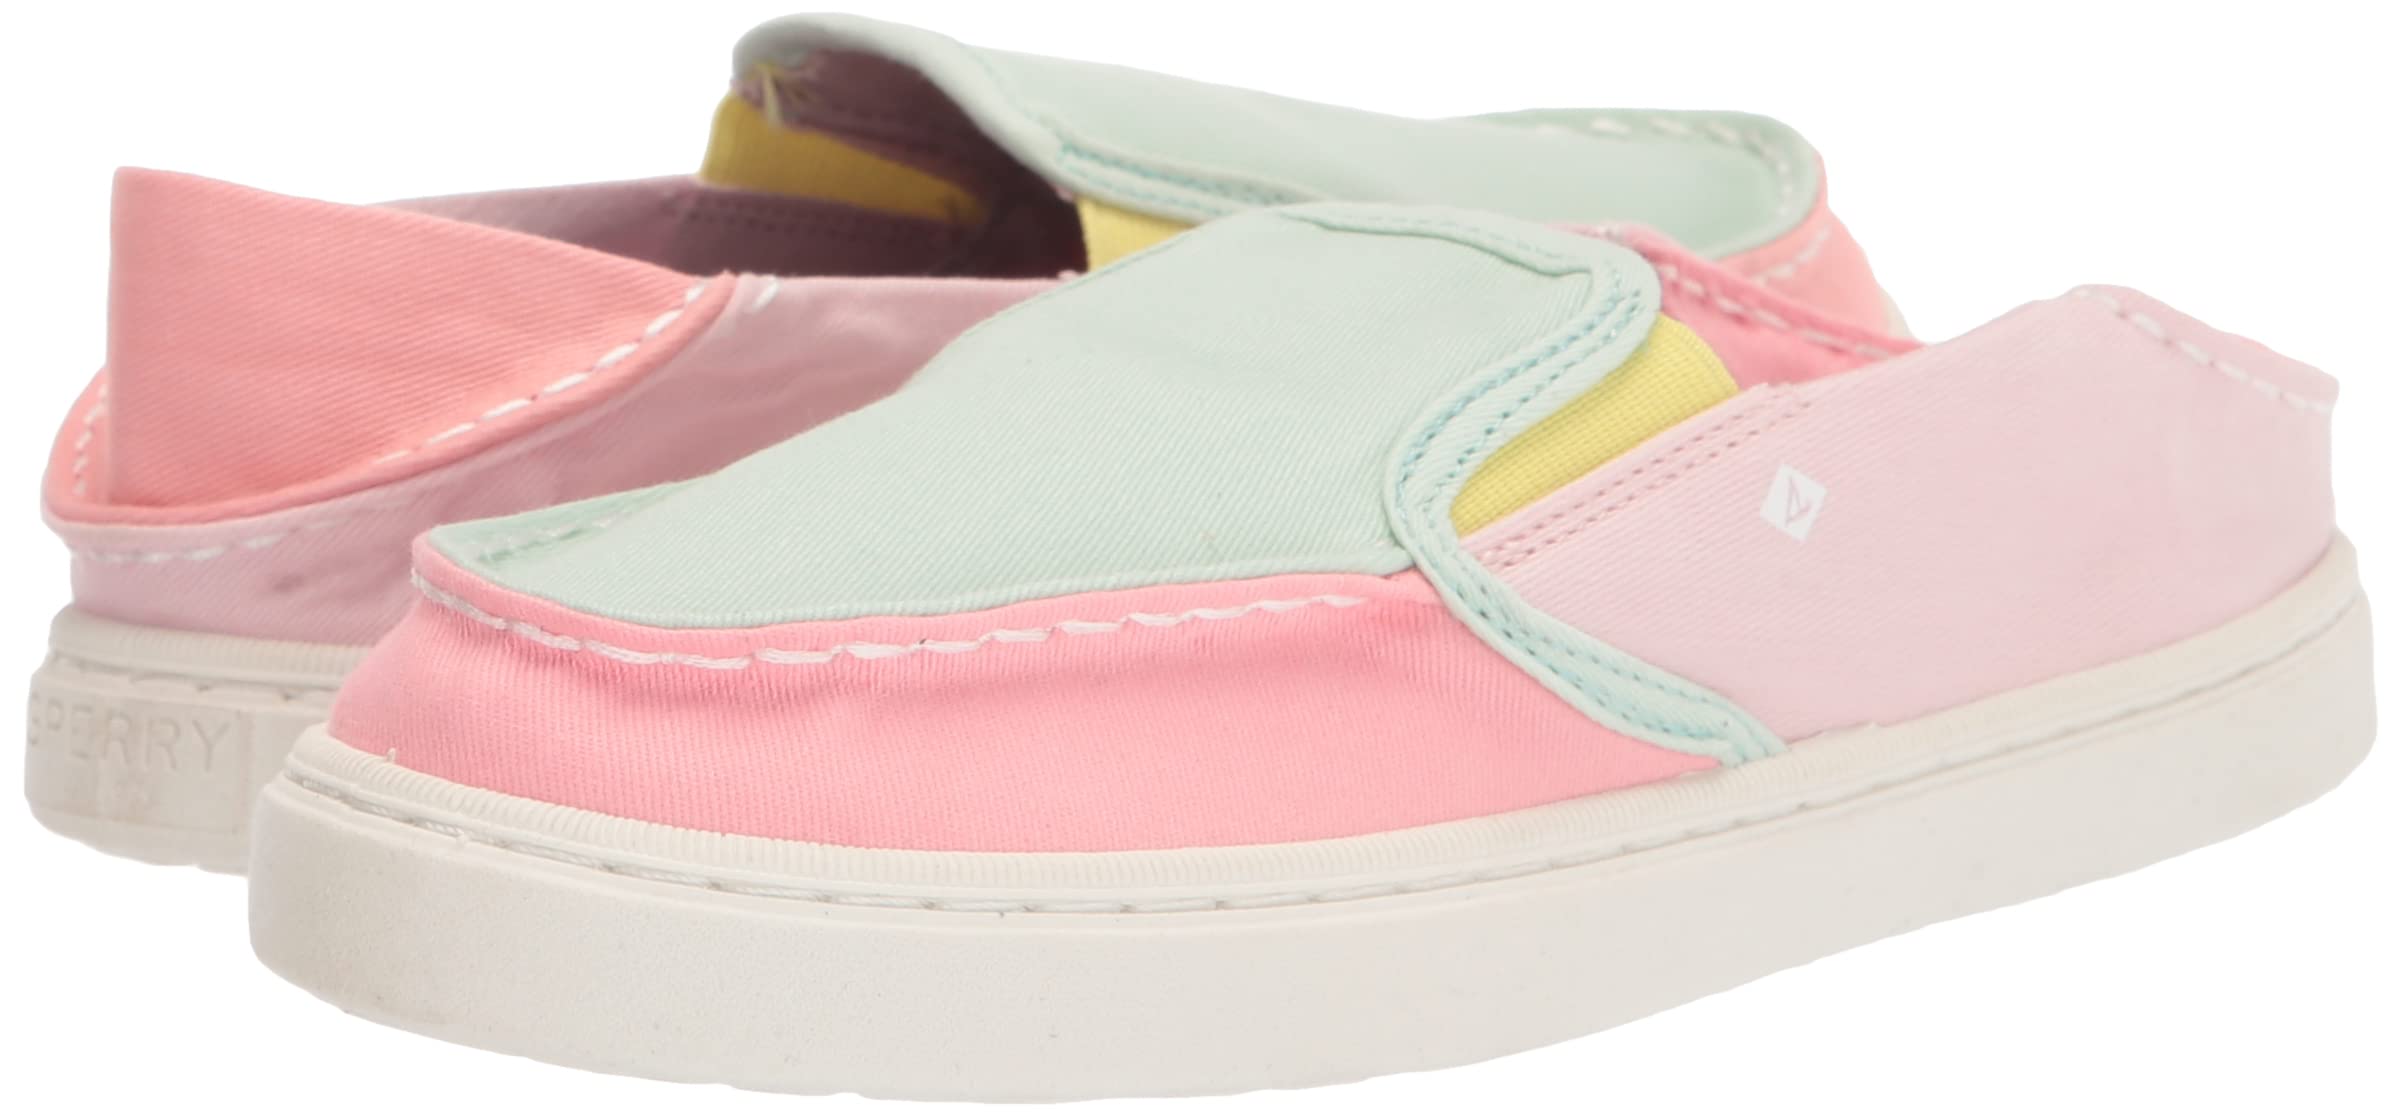 Sperry Unisex-Child Core Salty Washable Moccasin